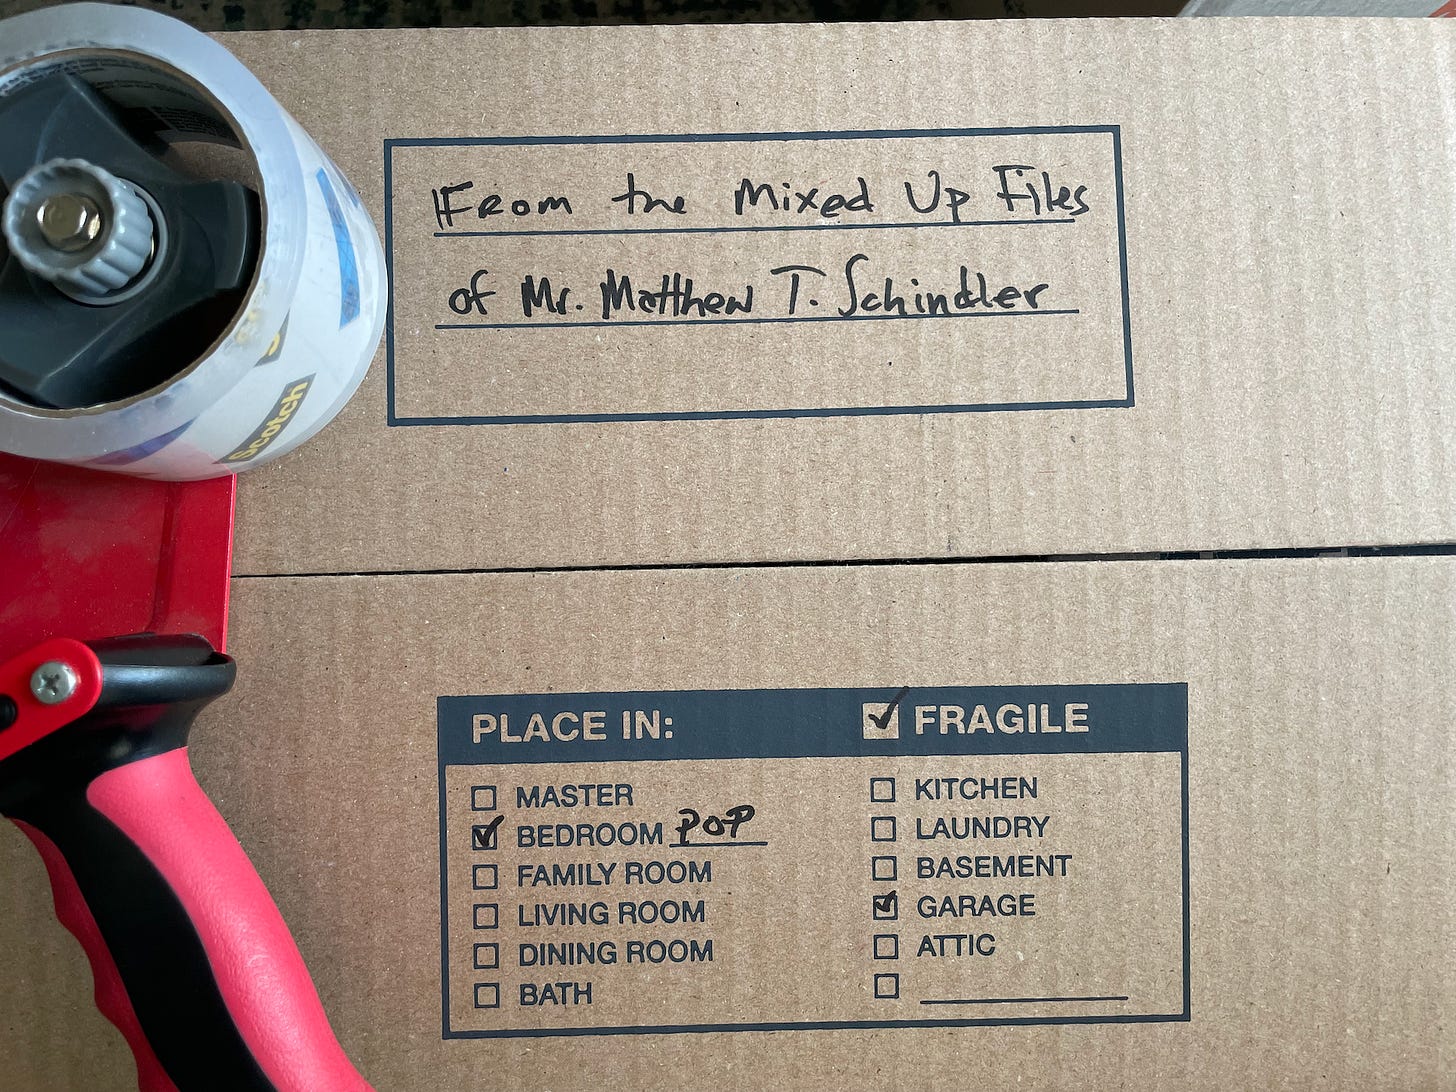 a cardboard moving box with "From the Mixed Up Files of Mr. Matthew T. Schindler writtten on it and Bedroom Pop, Garage, and Fragile